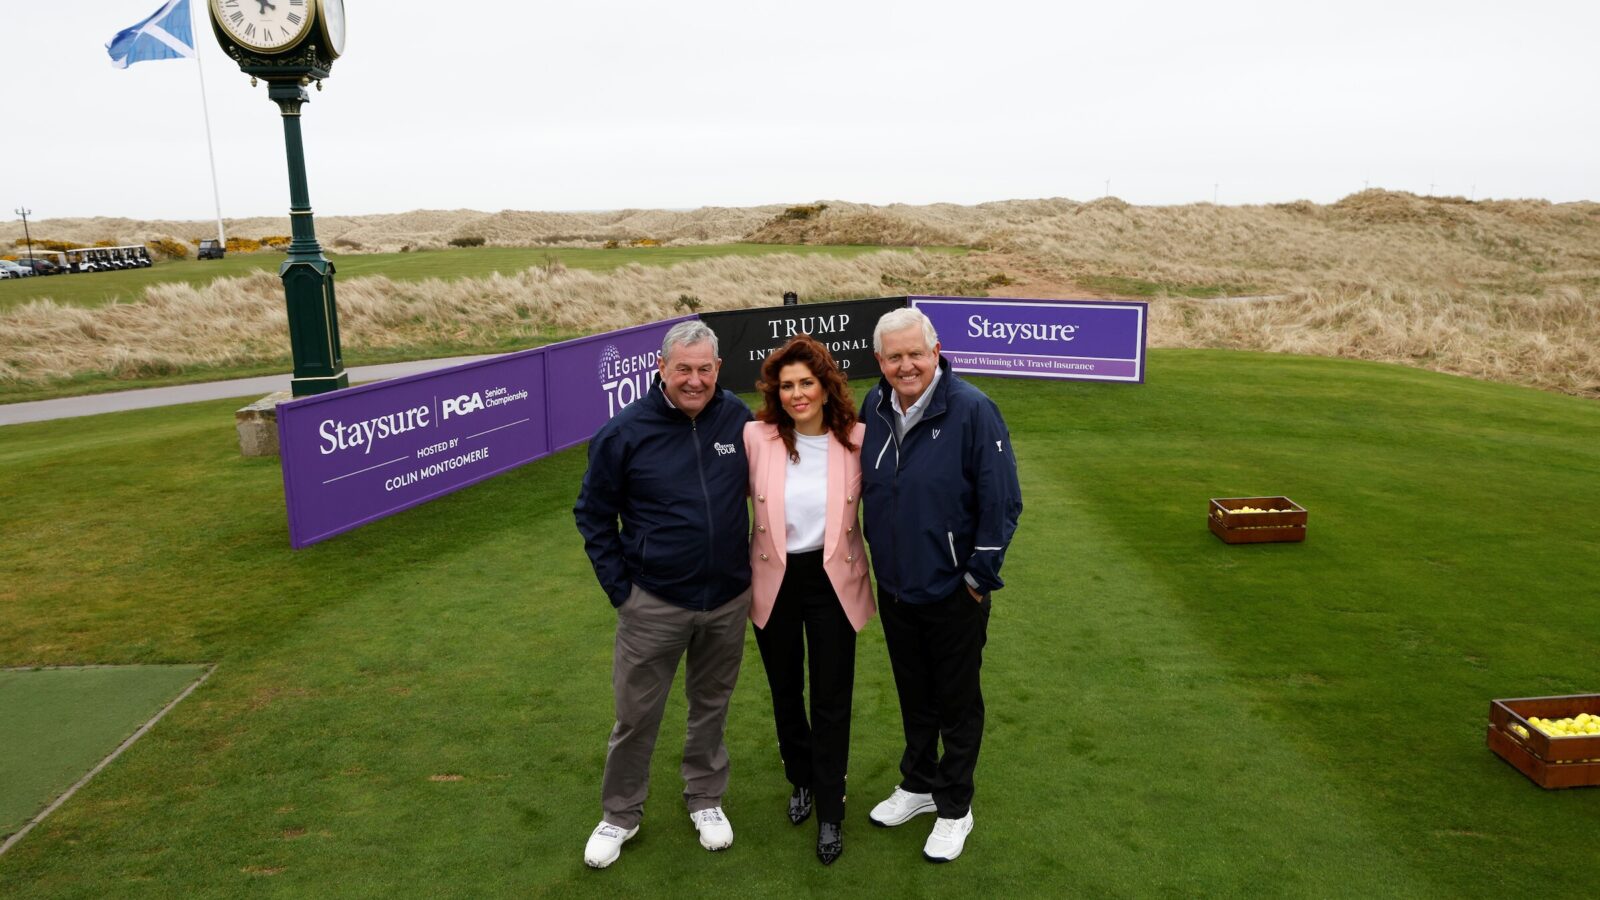 Colin Montgomerie to host Legends event at Trump International